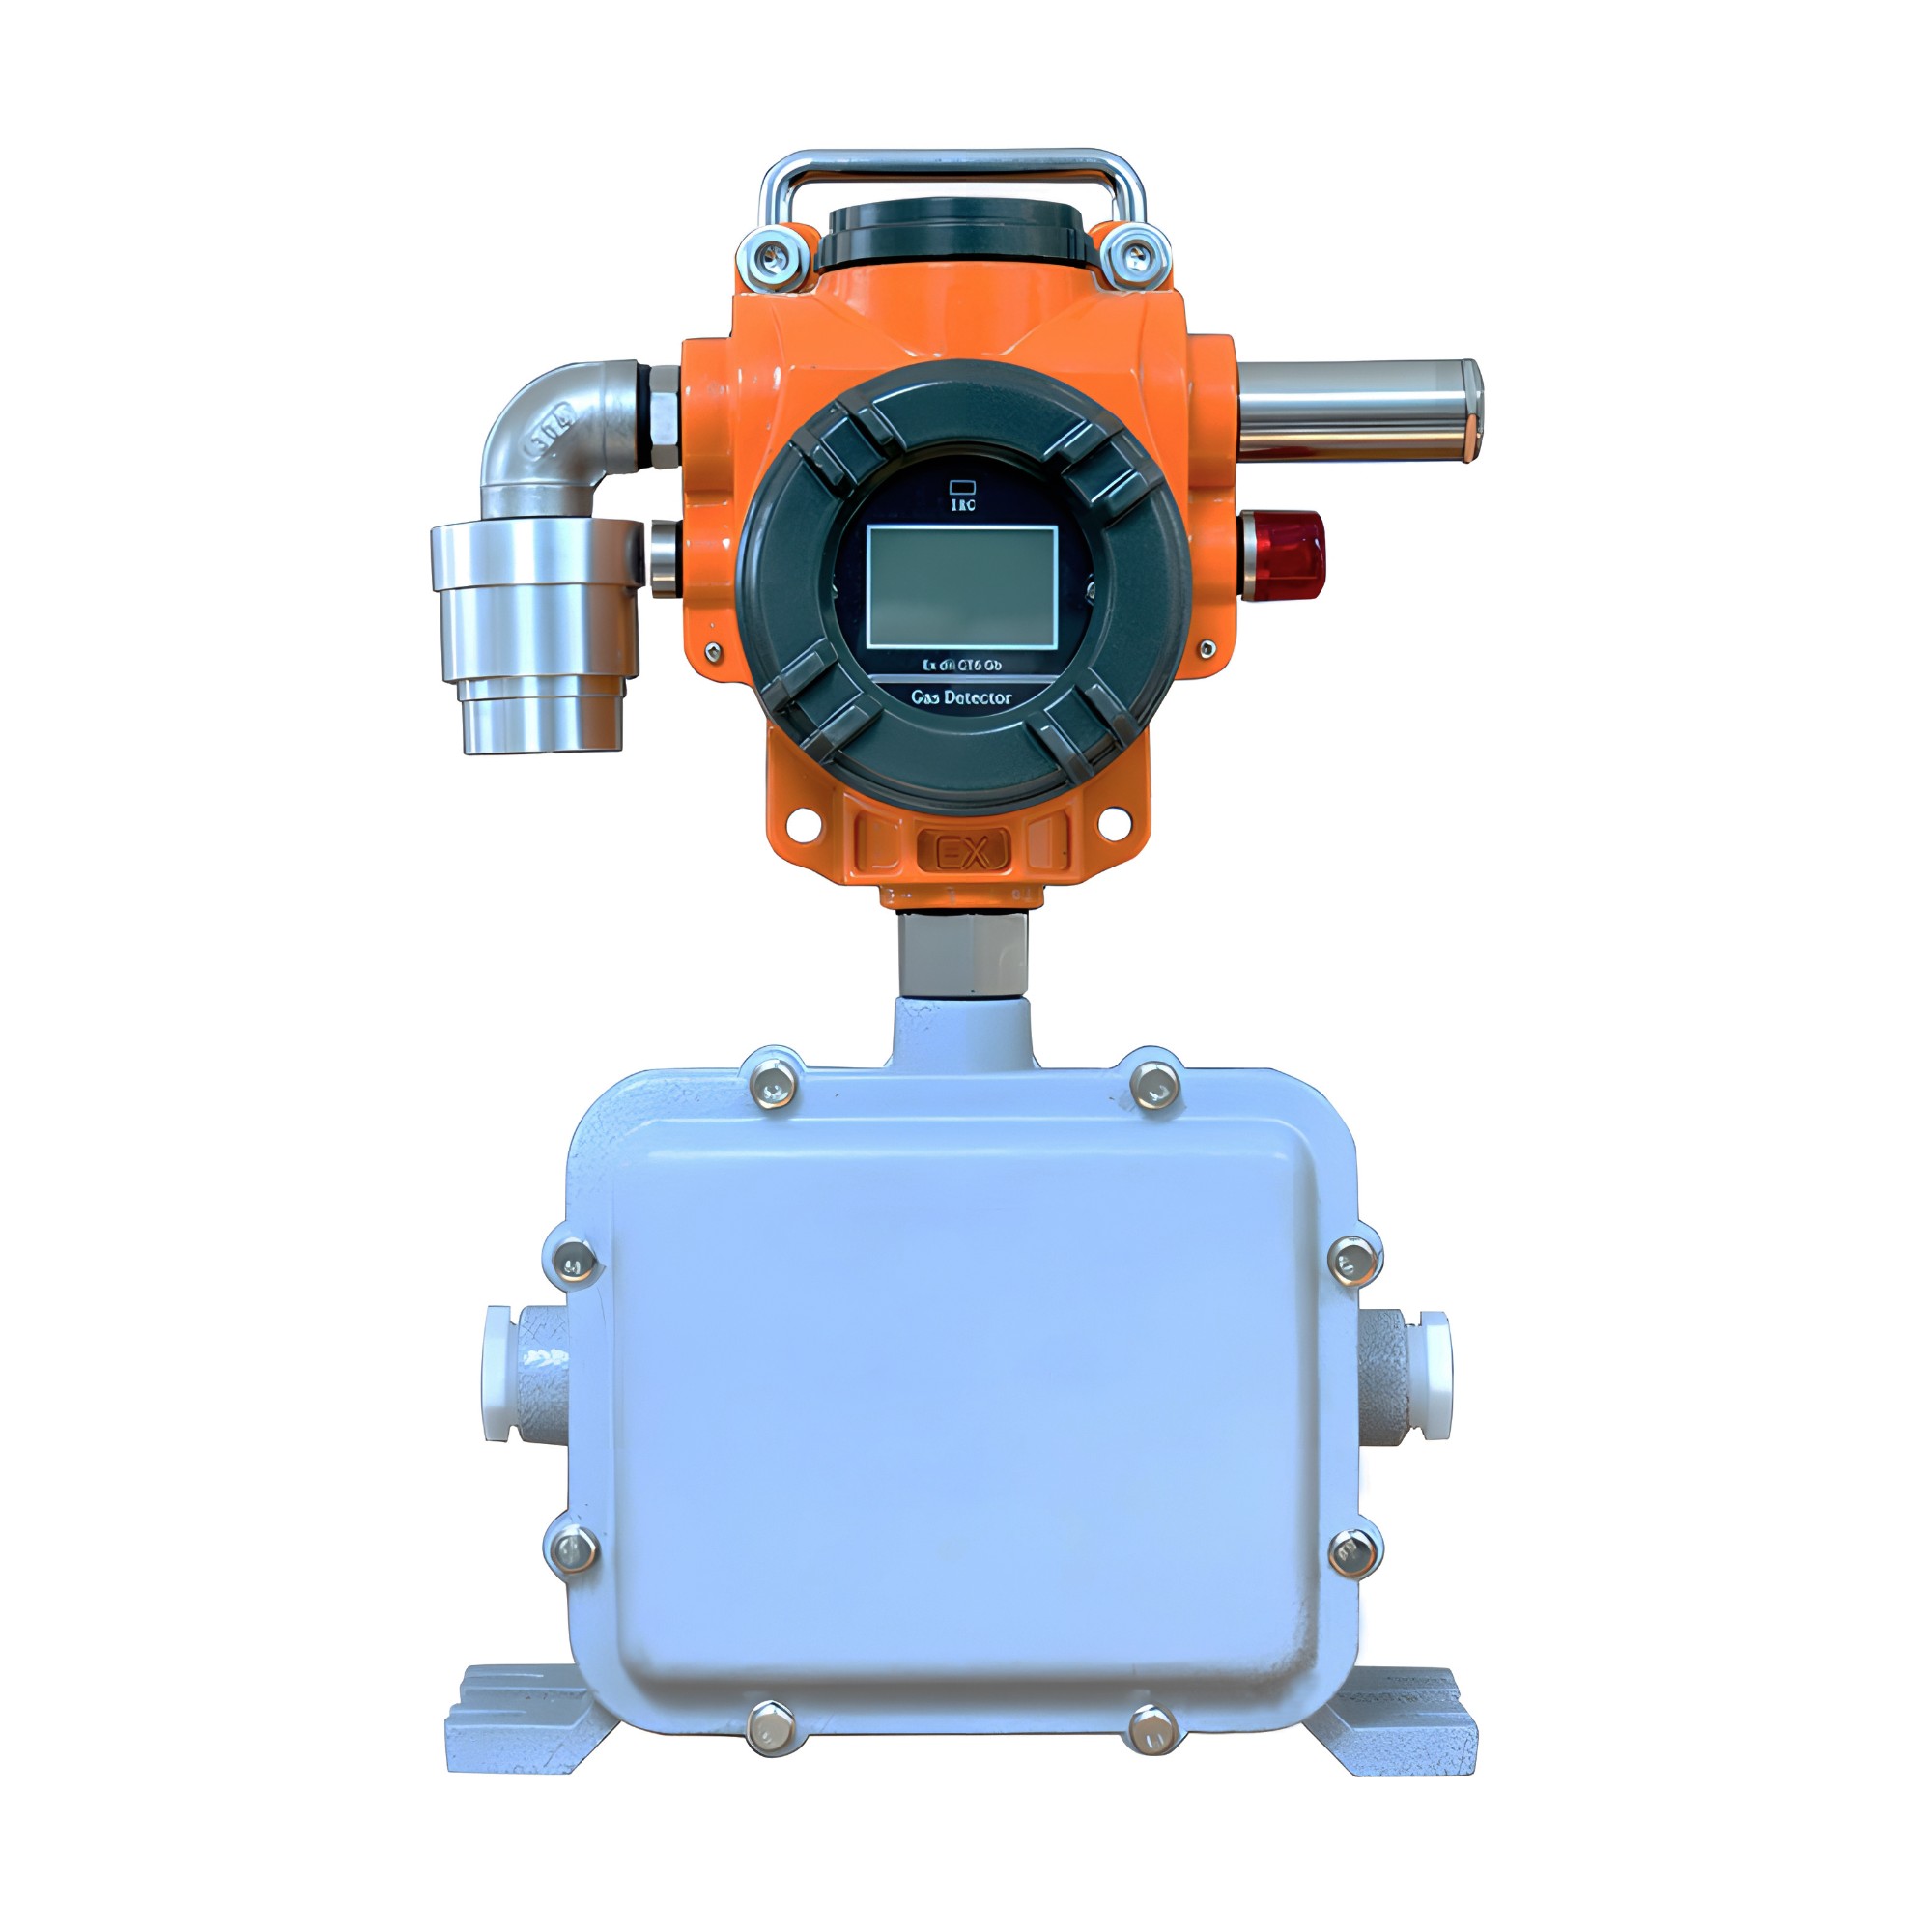 S400-W fixed gas detector + mobile battery